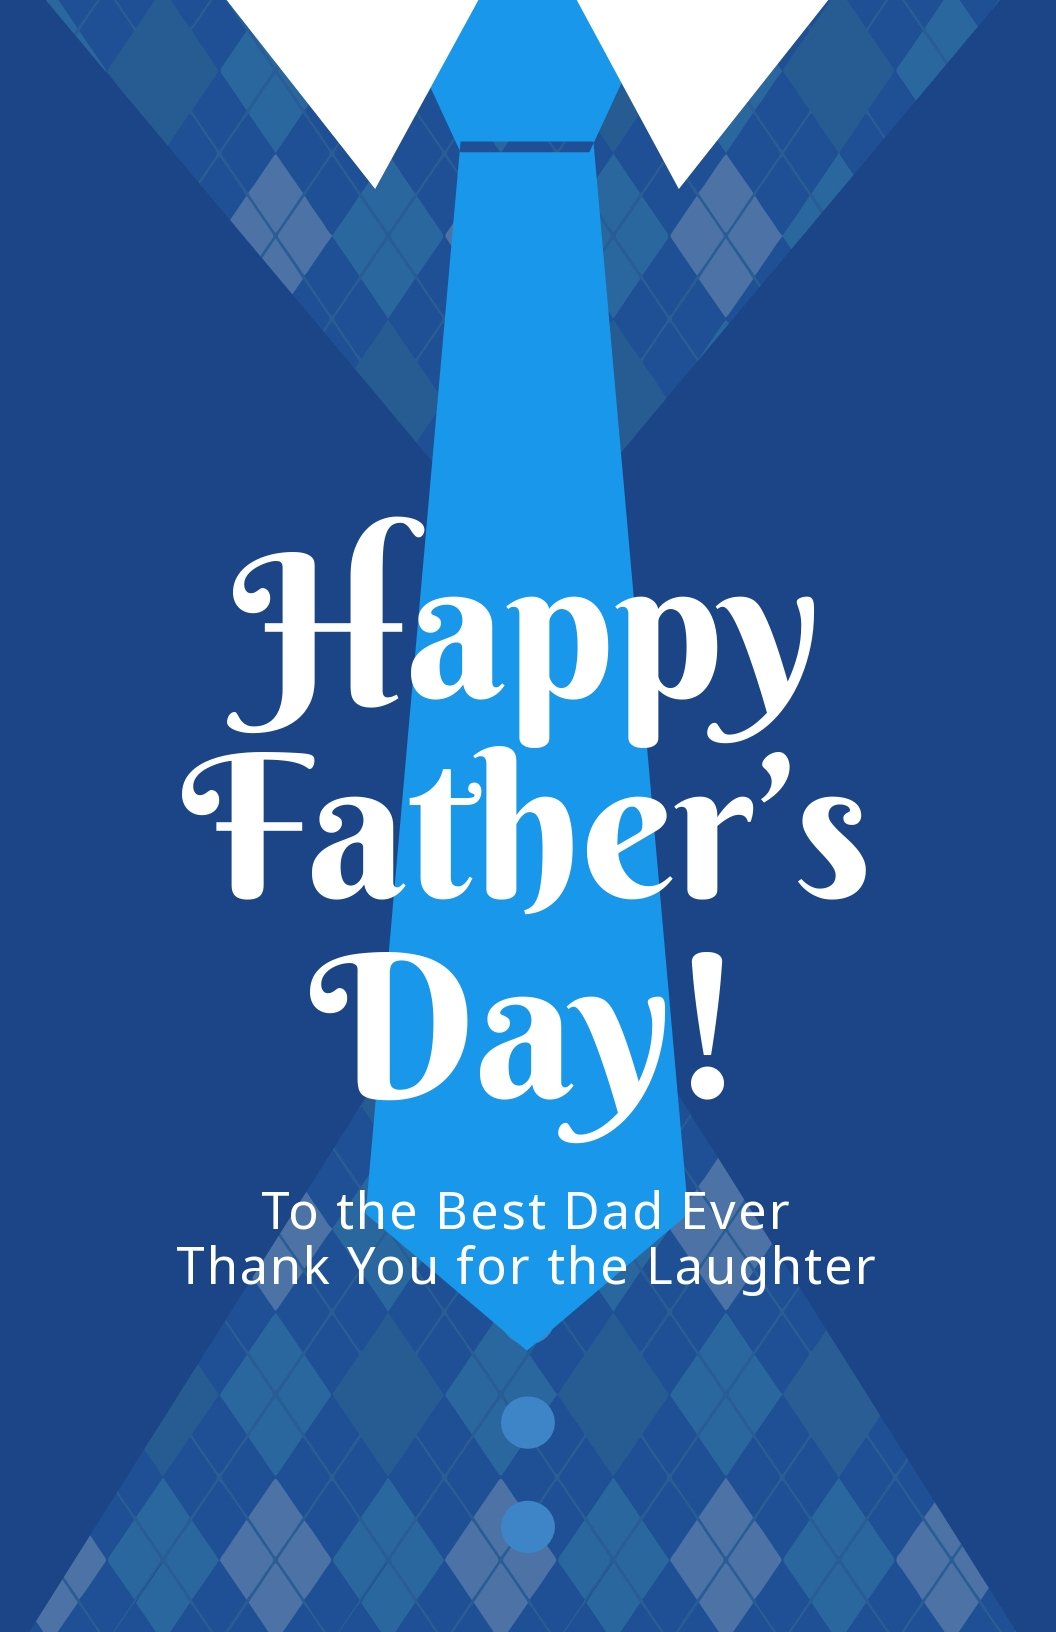 Free Creative Father's Day Poster Template